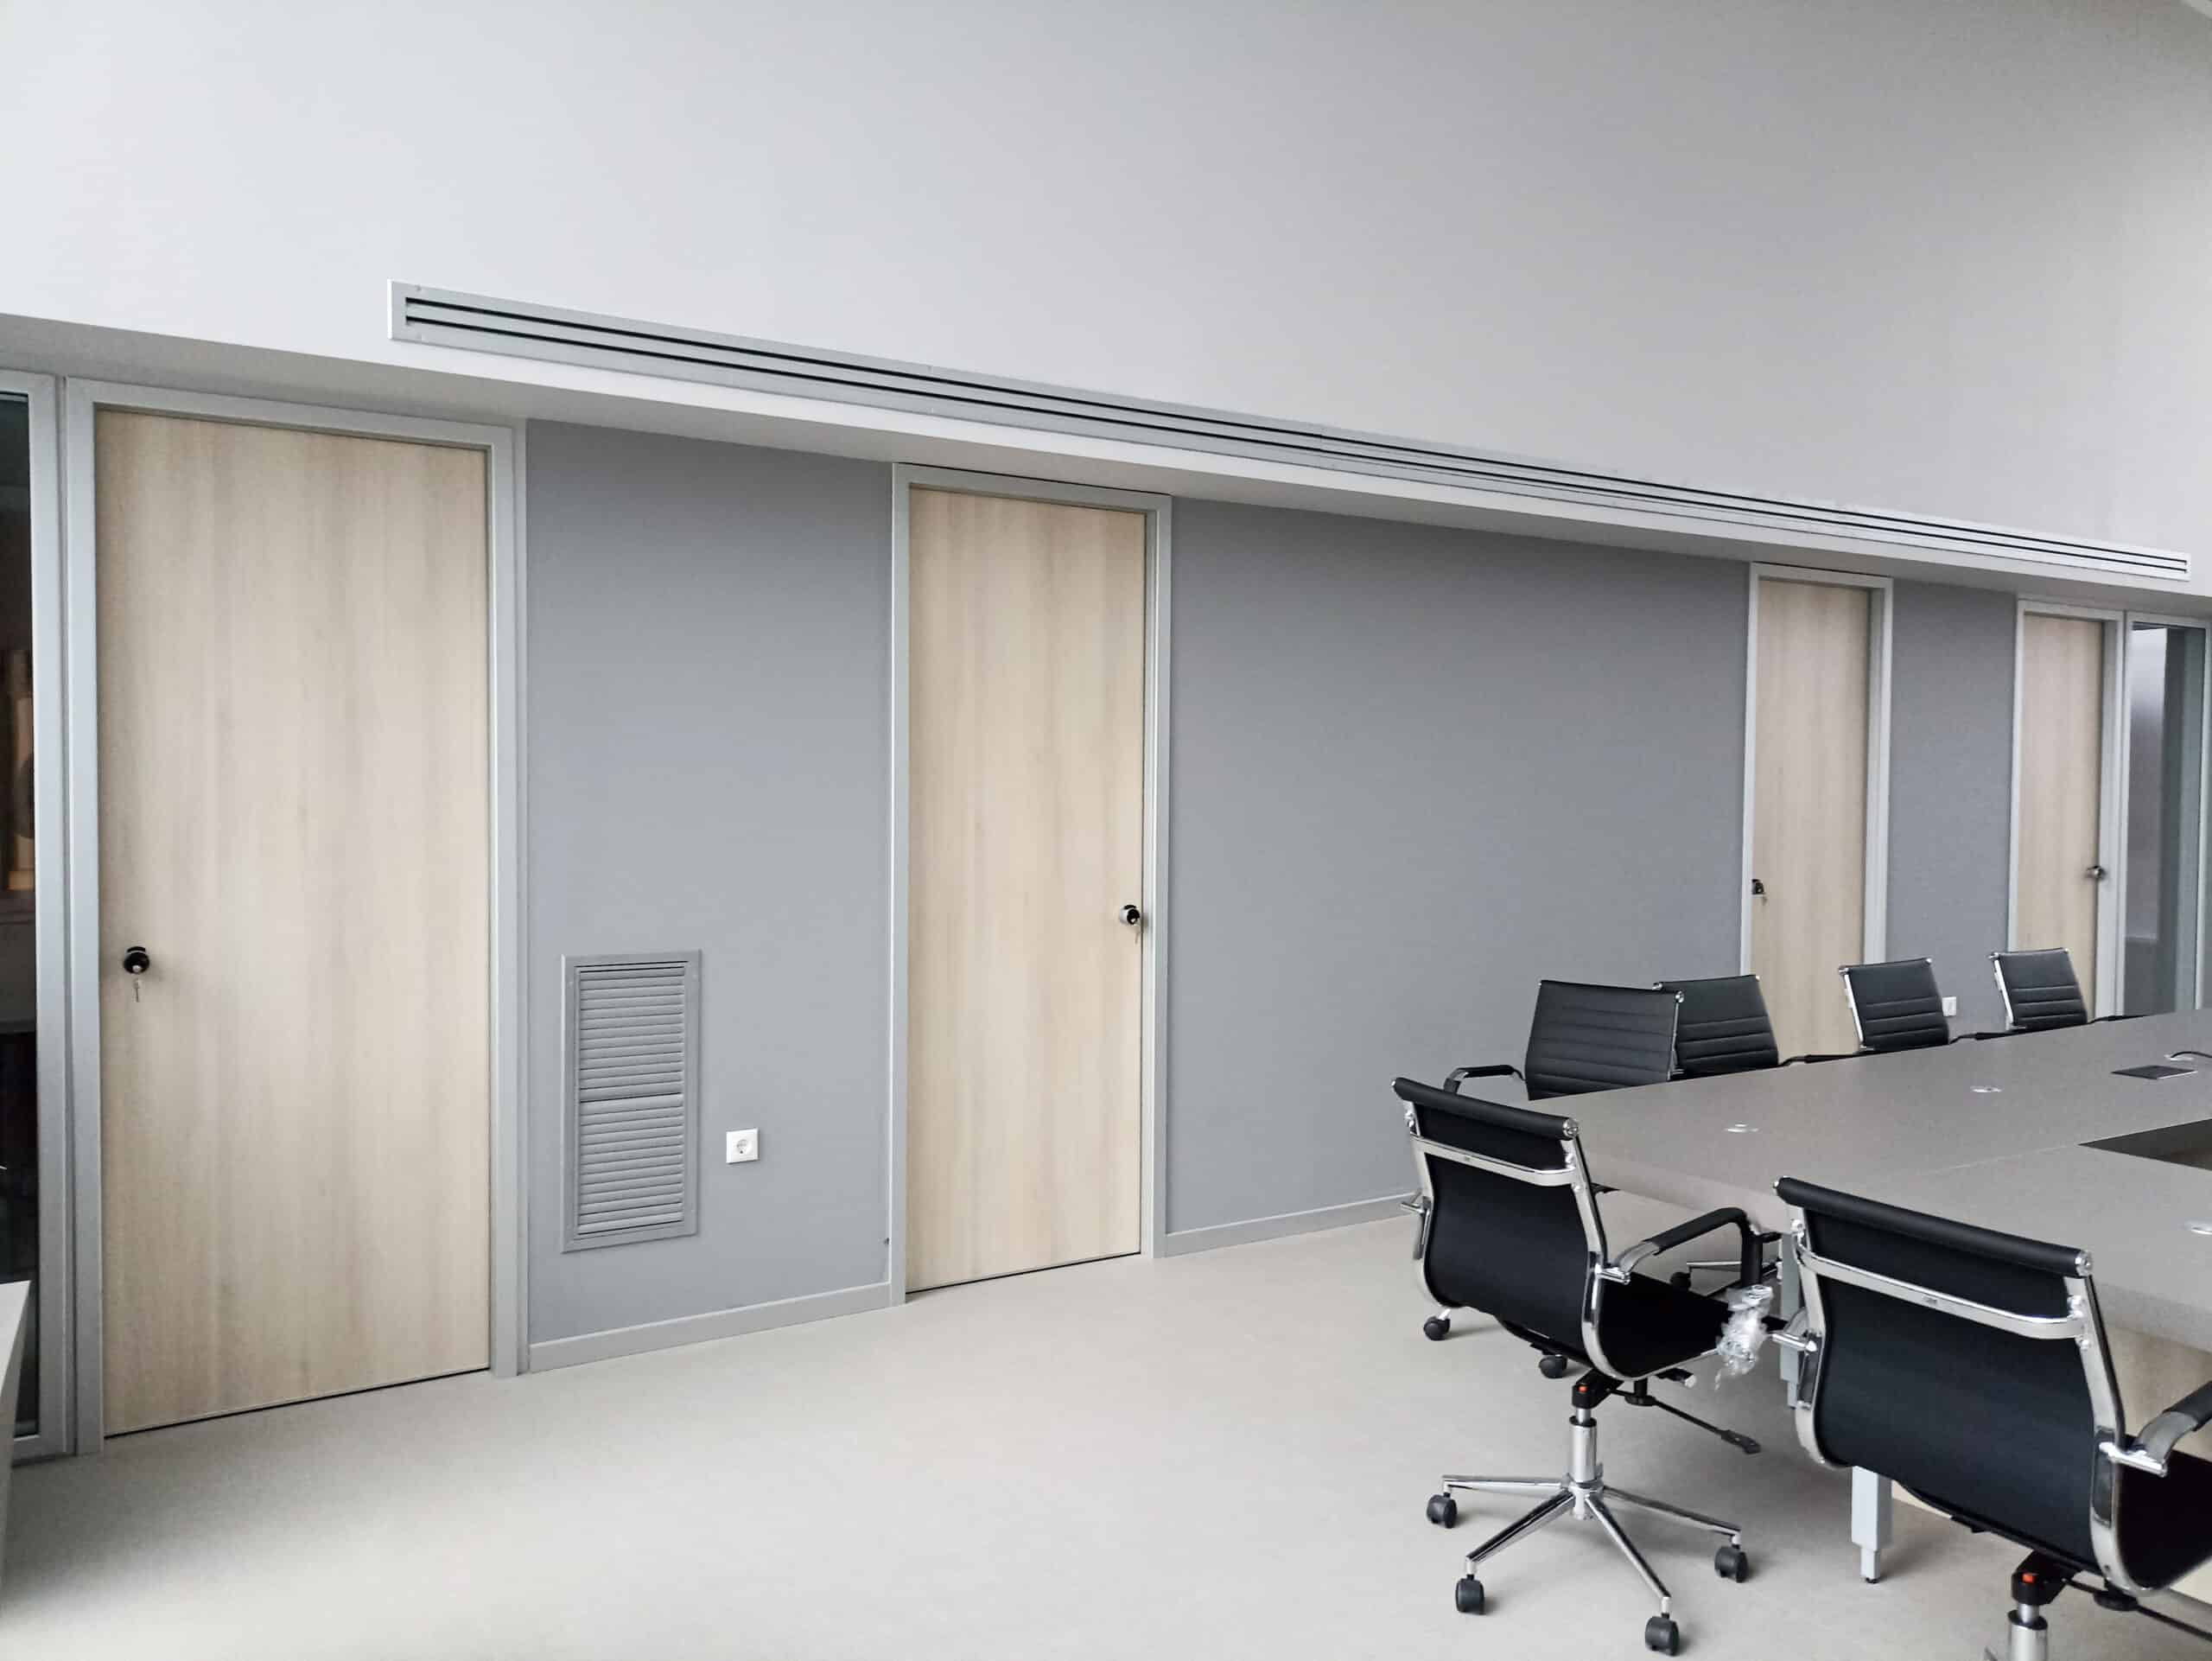 Divided door frames for plasterboard partitions, of variable thickness 75-100mm, 100-135mm and 135mm +.